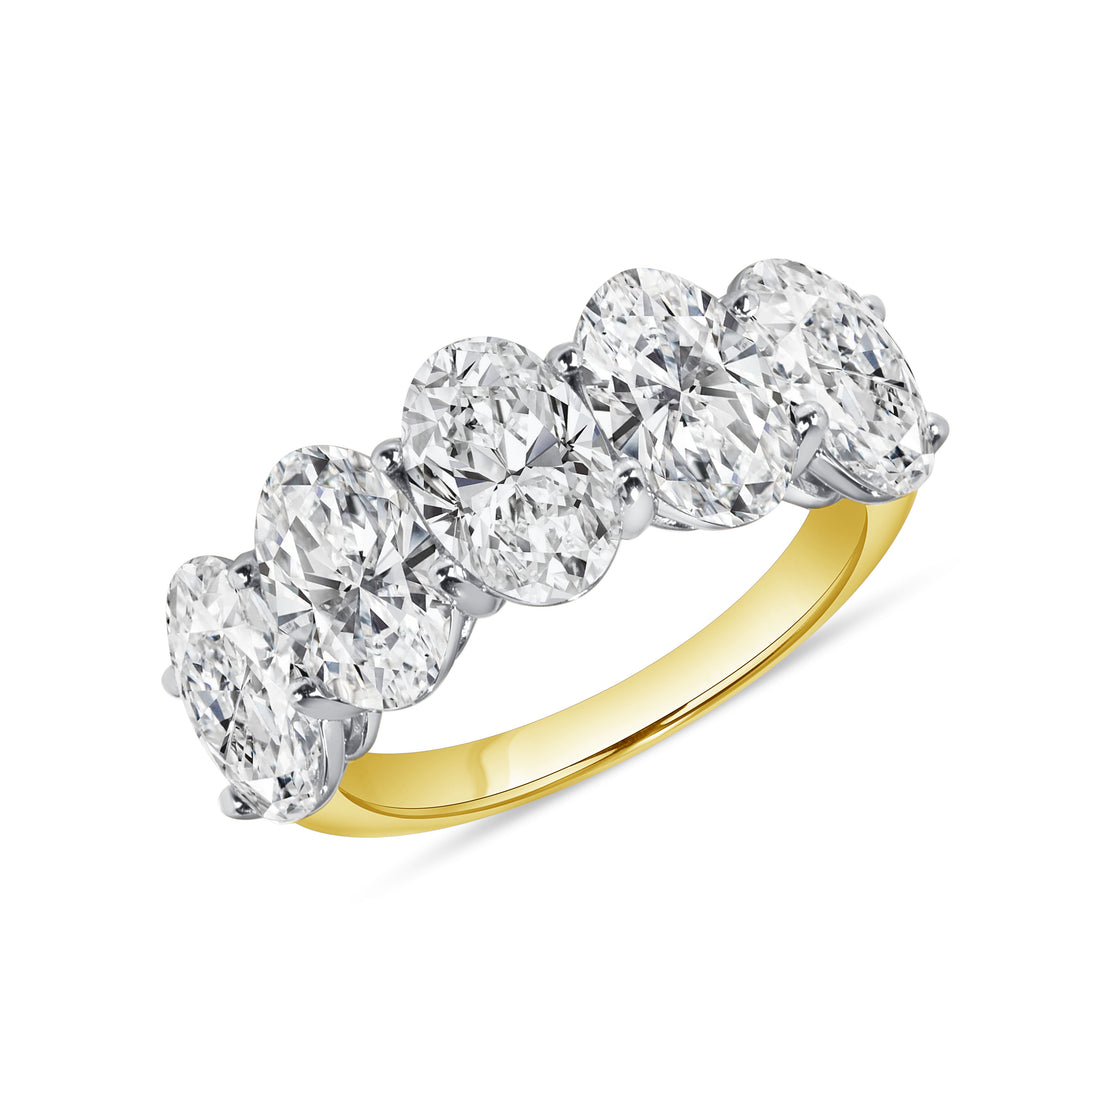 5.05 CT. Oval Cut Diamond Half Eternity Band in Platinum and 18K Yellow Gold